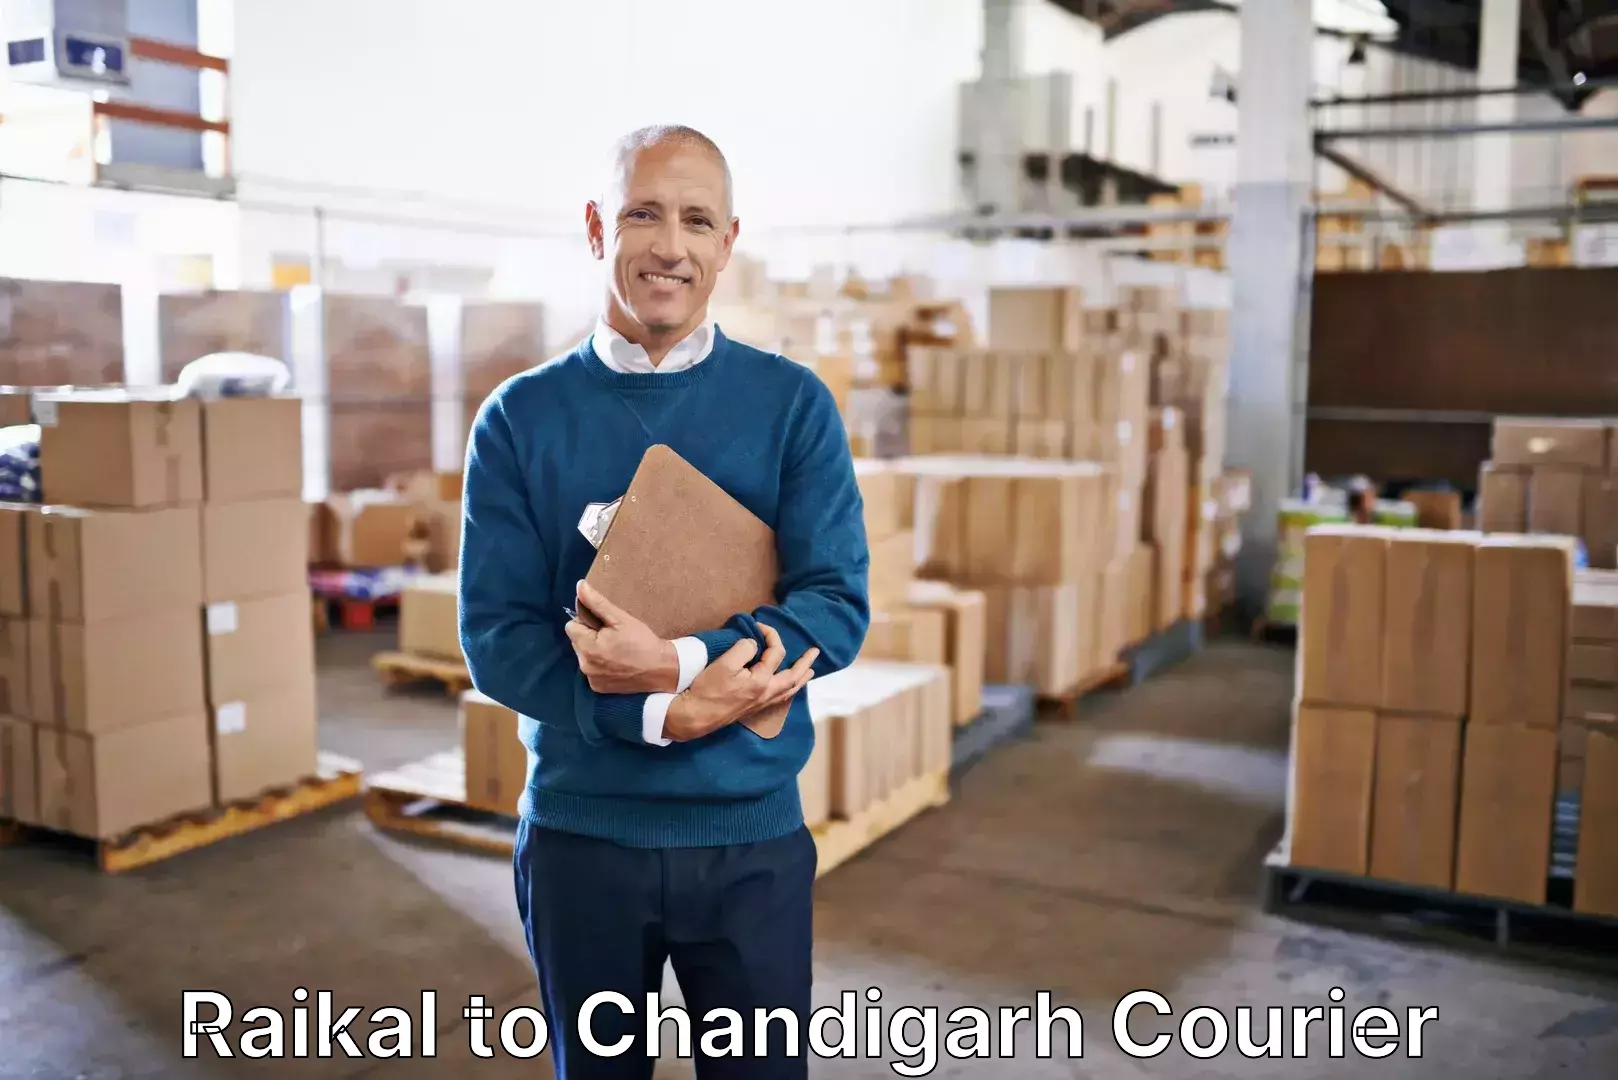 Luggage transport consultancy Raikal to Chandigarh